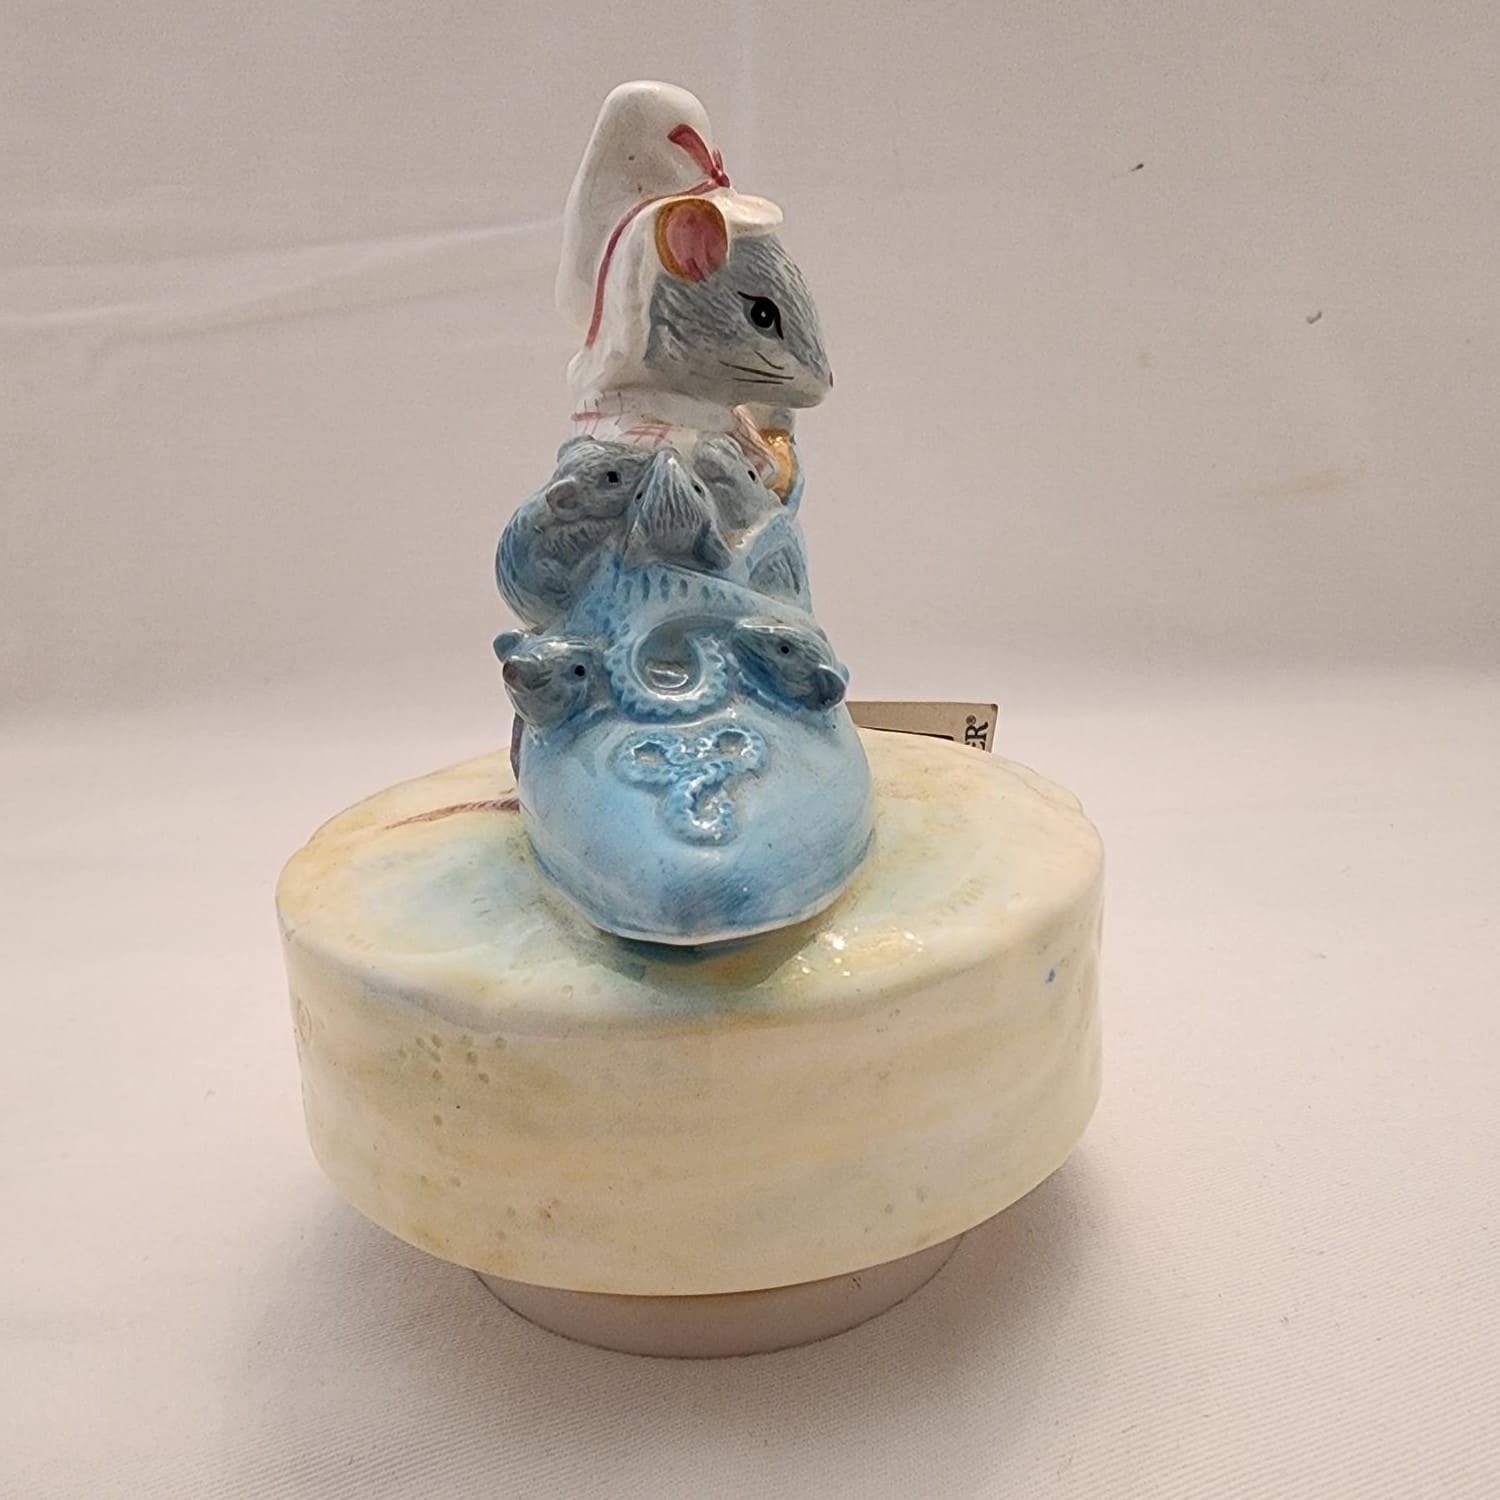 A mouse figurine perched on a shoe.